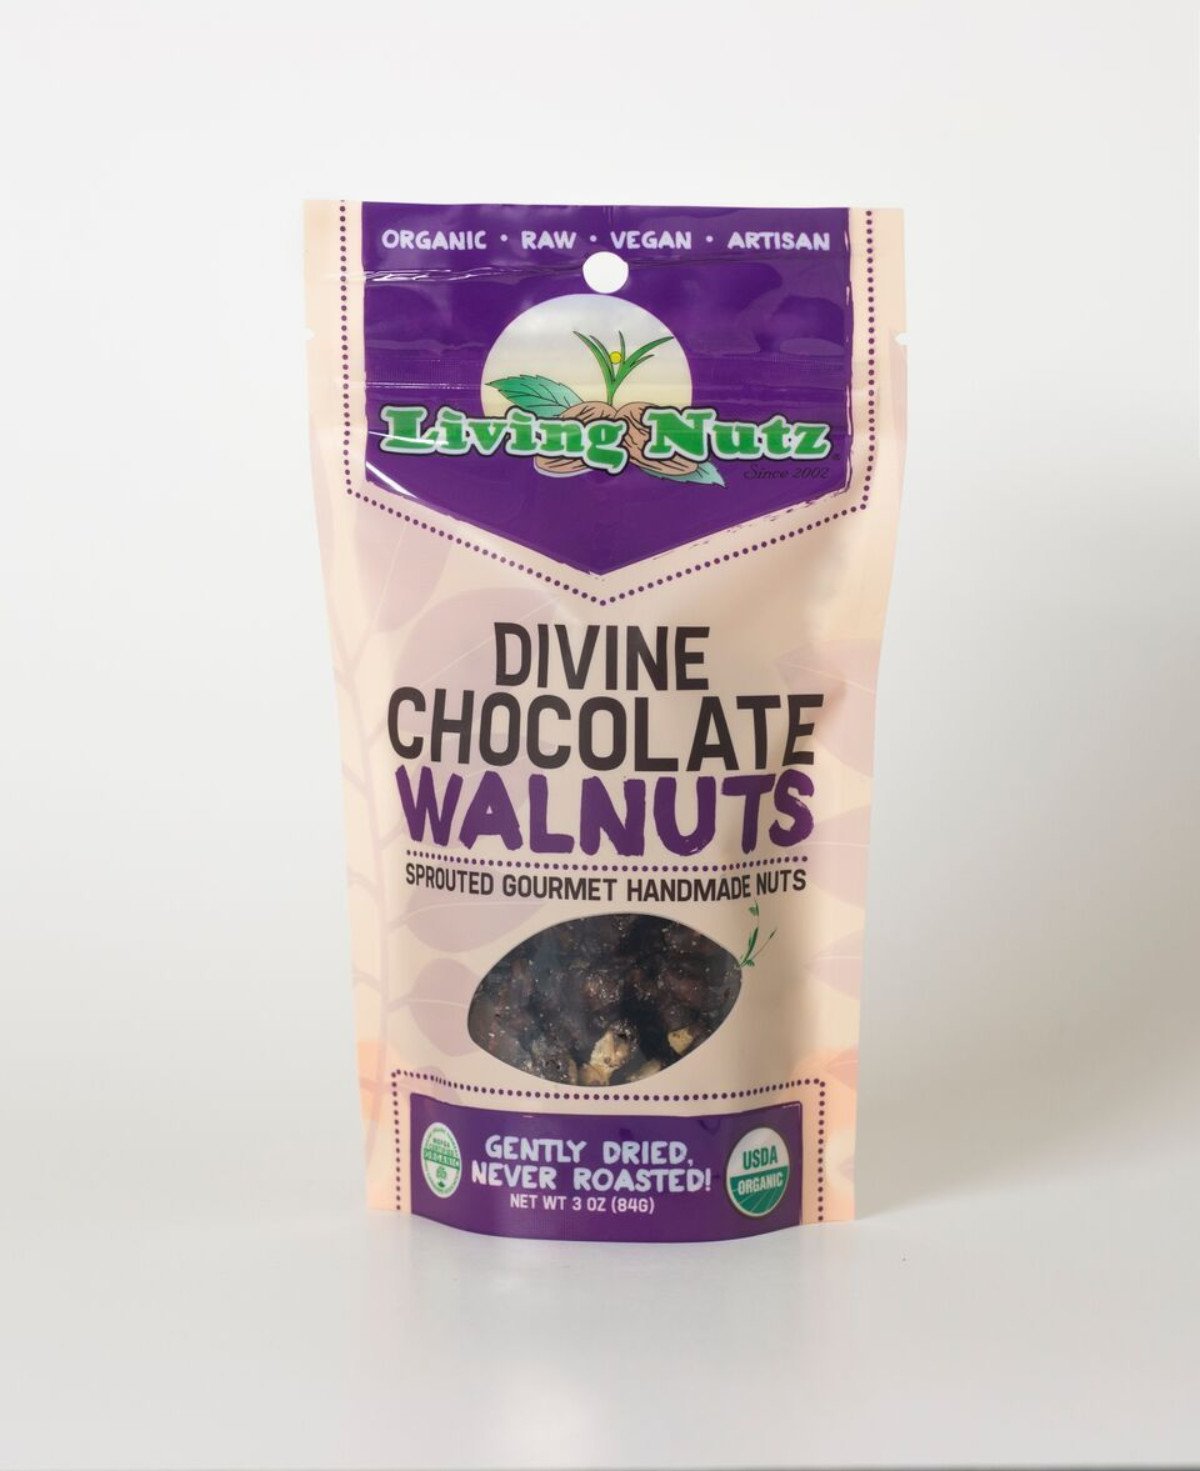 Organic raw sprouted nuts. Sprouted raw Walnuts with chocolate. Healthy truth about nuts!